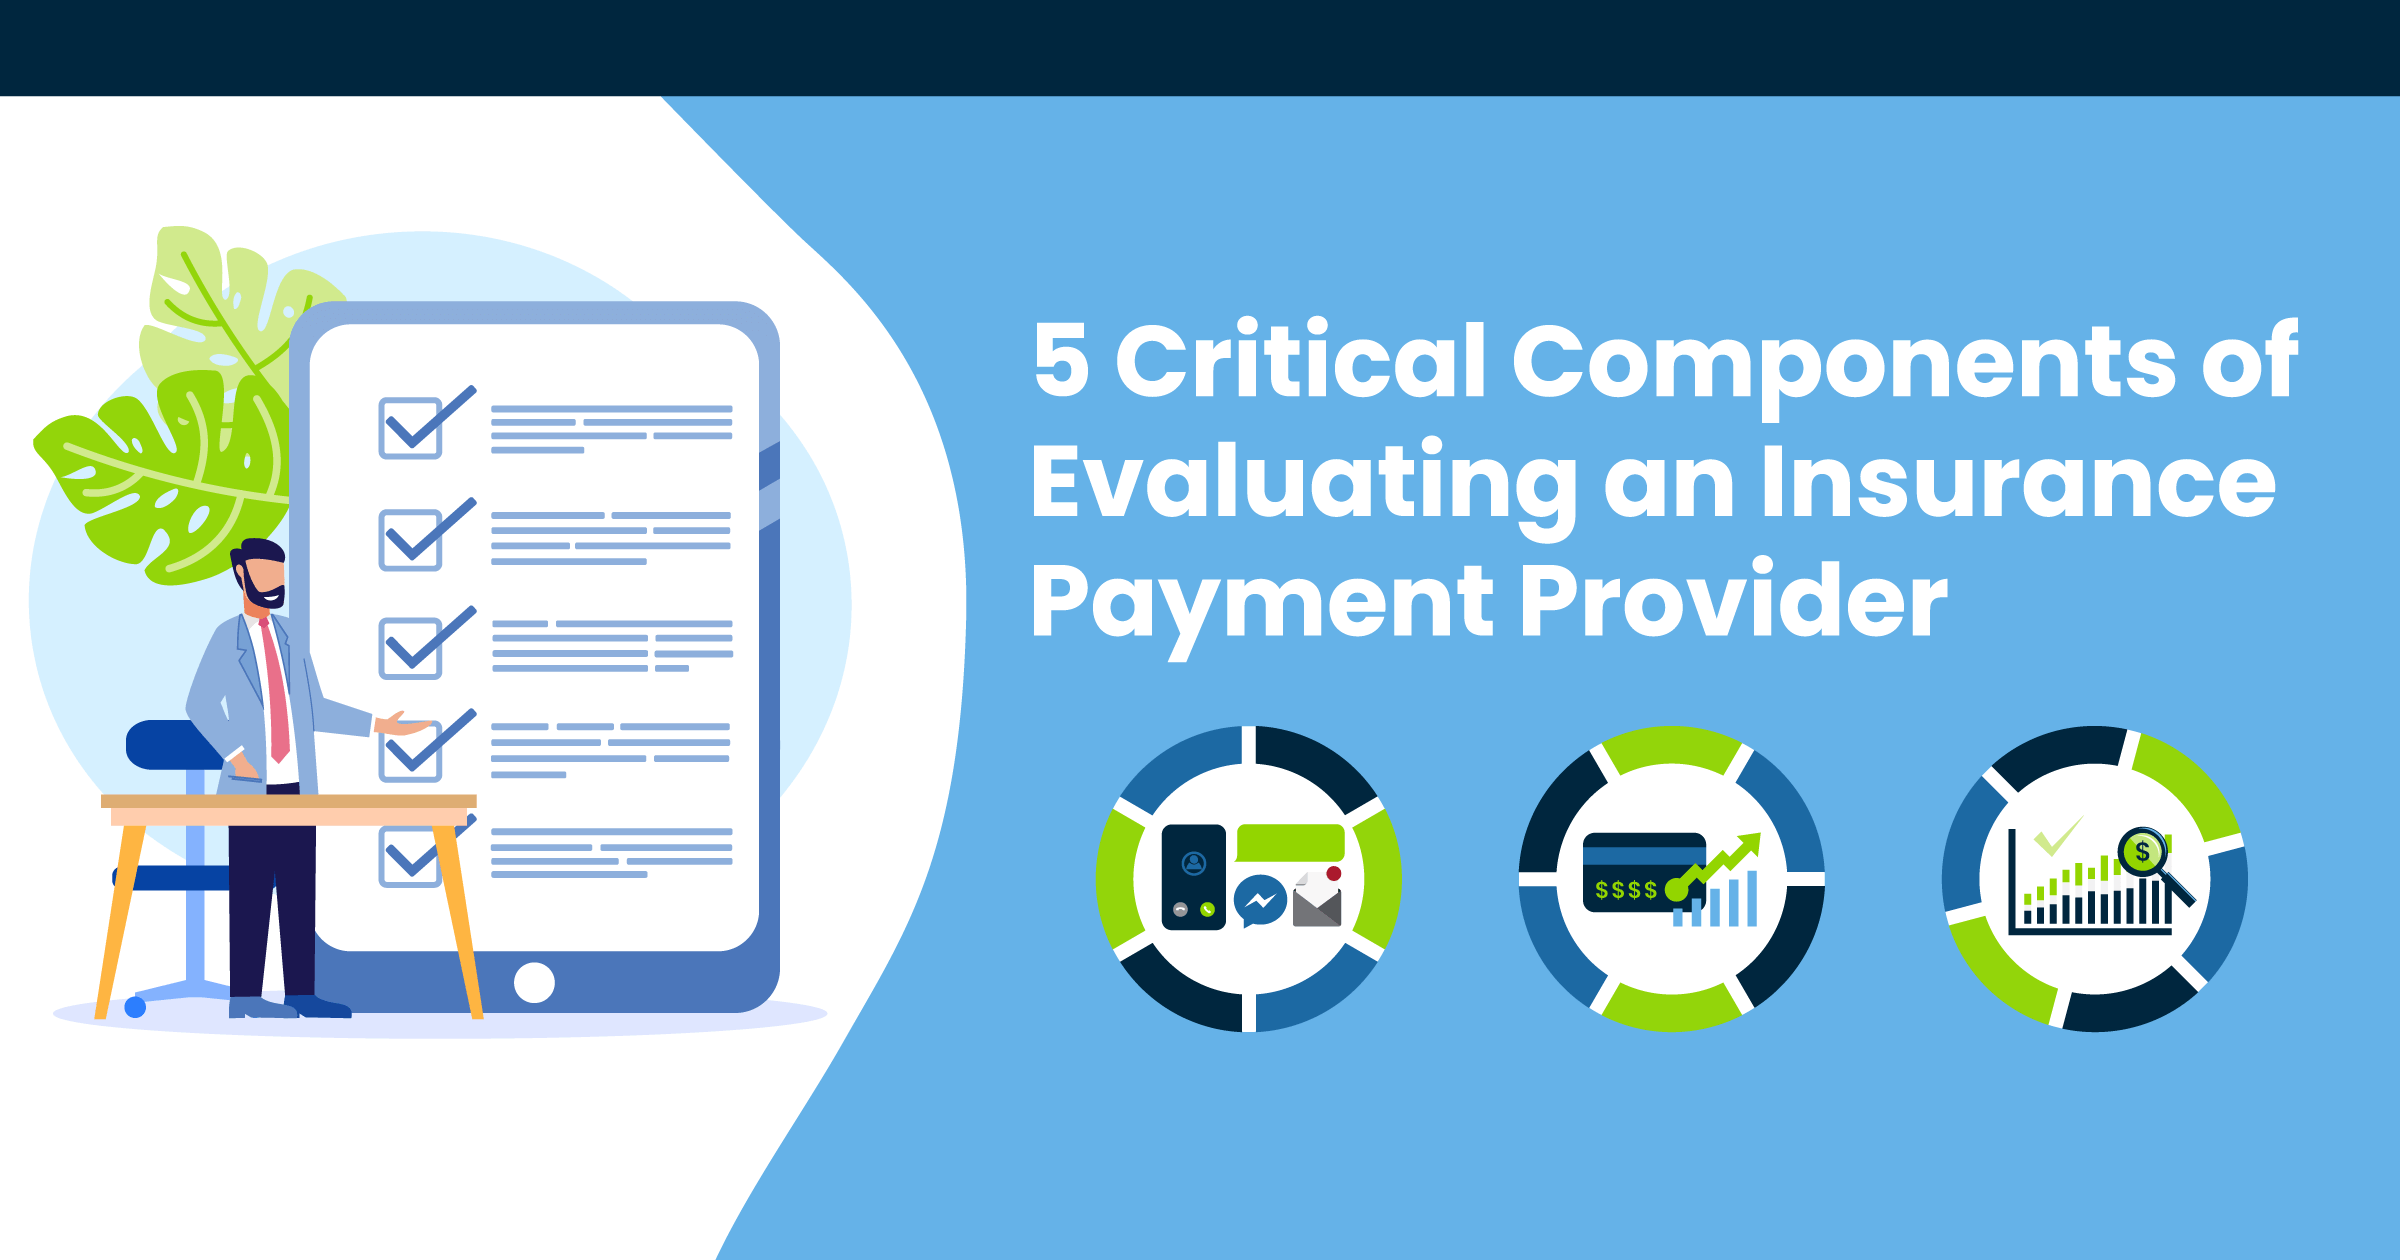 5 Critical Components of Evaluating an Insurance Payment Provider Illustration